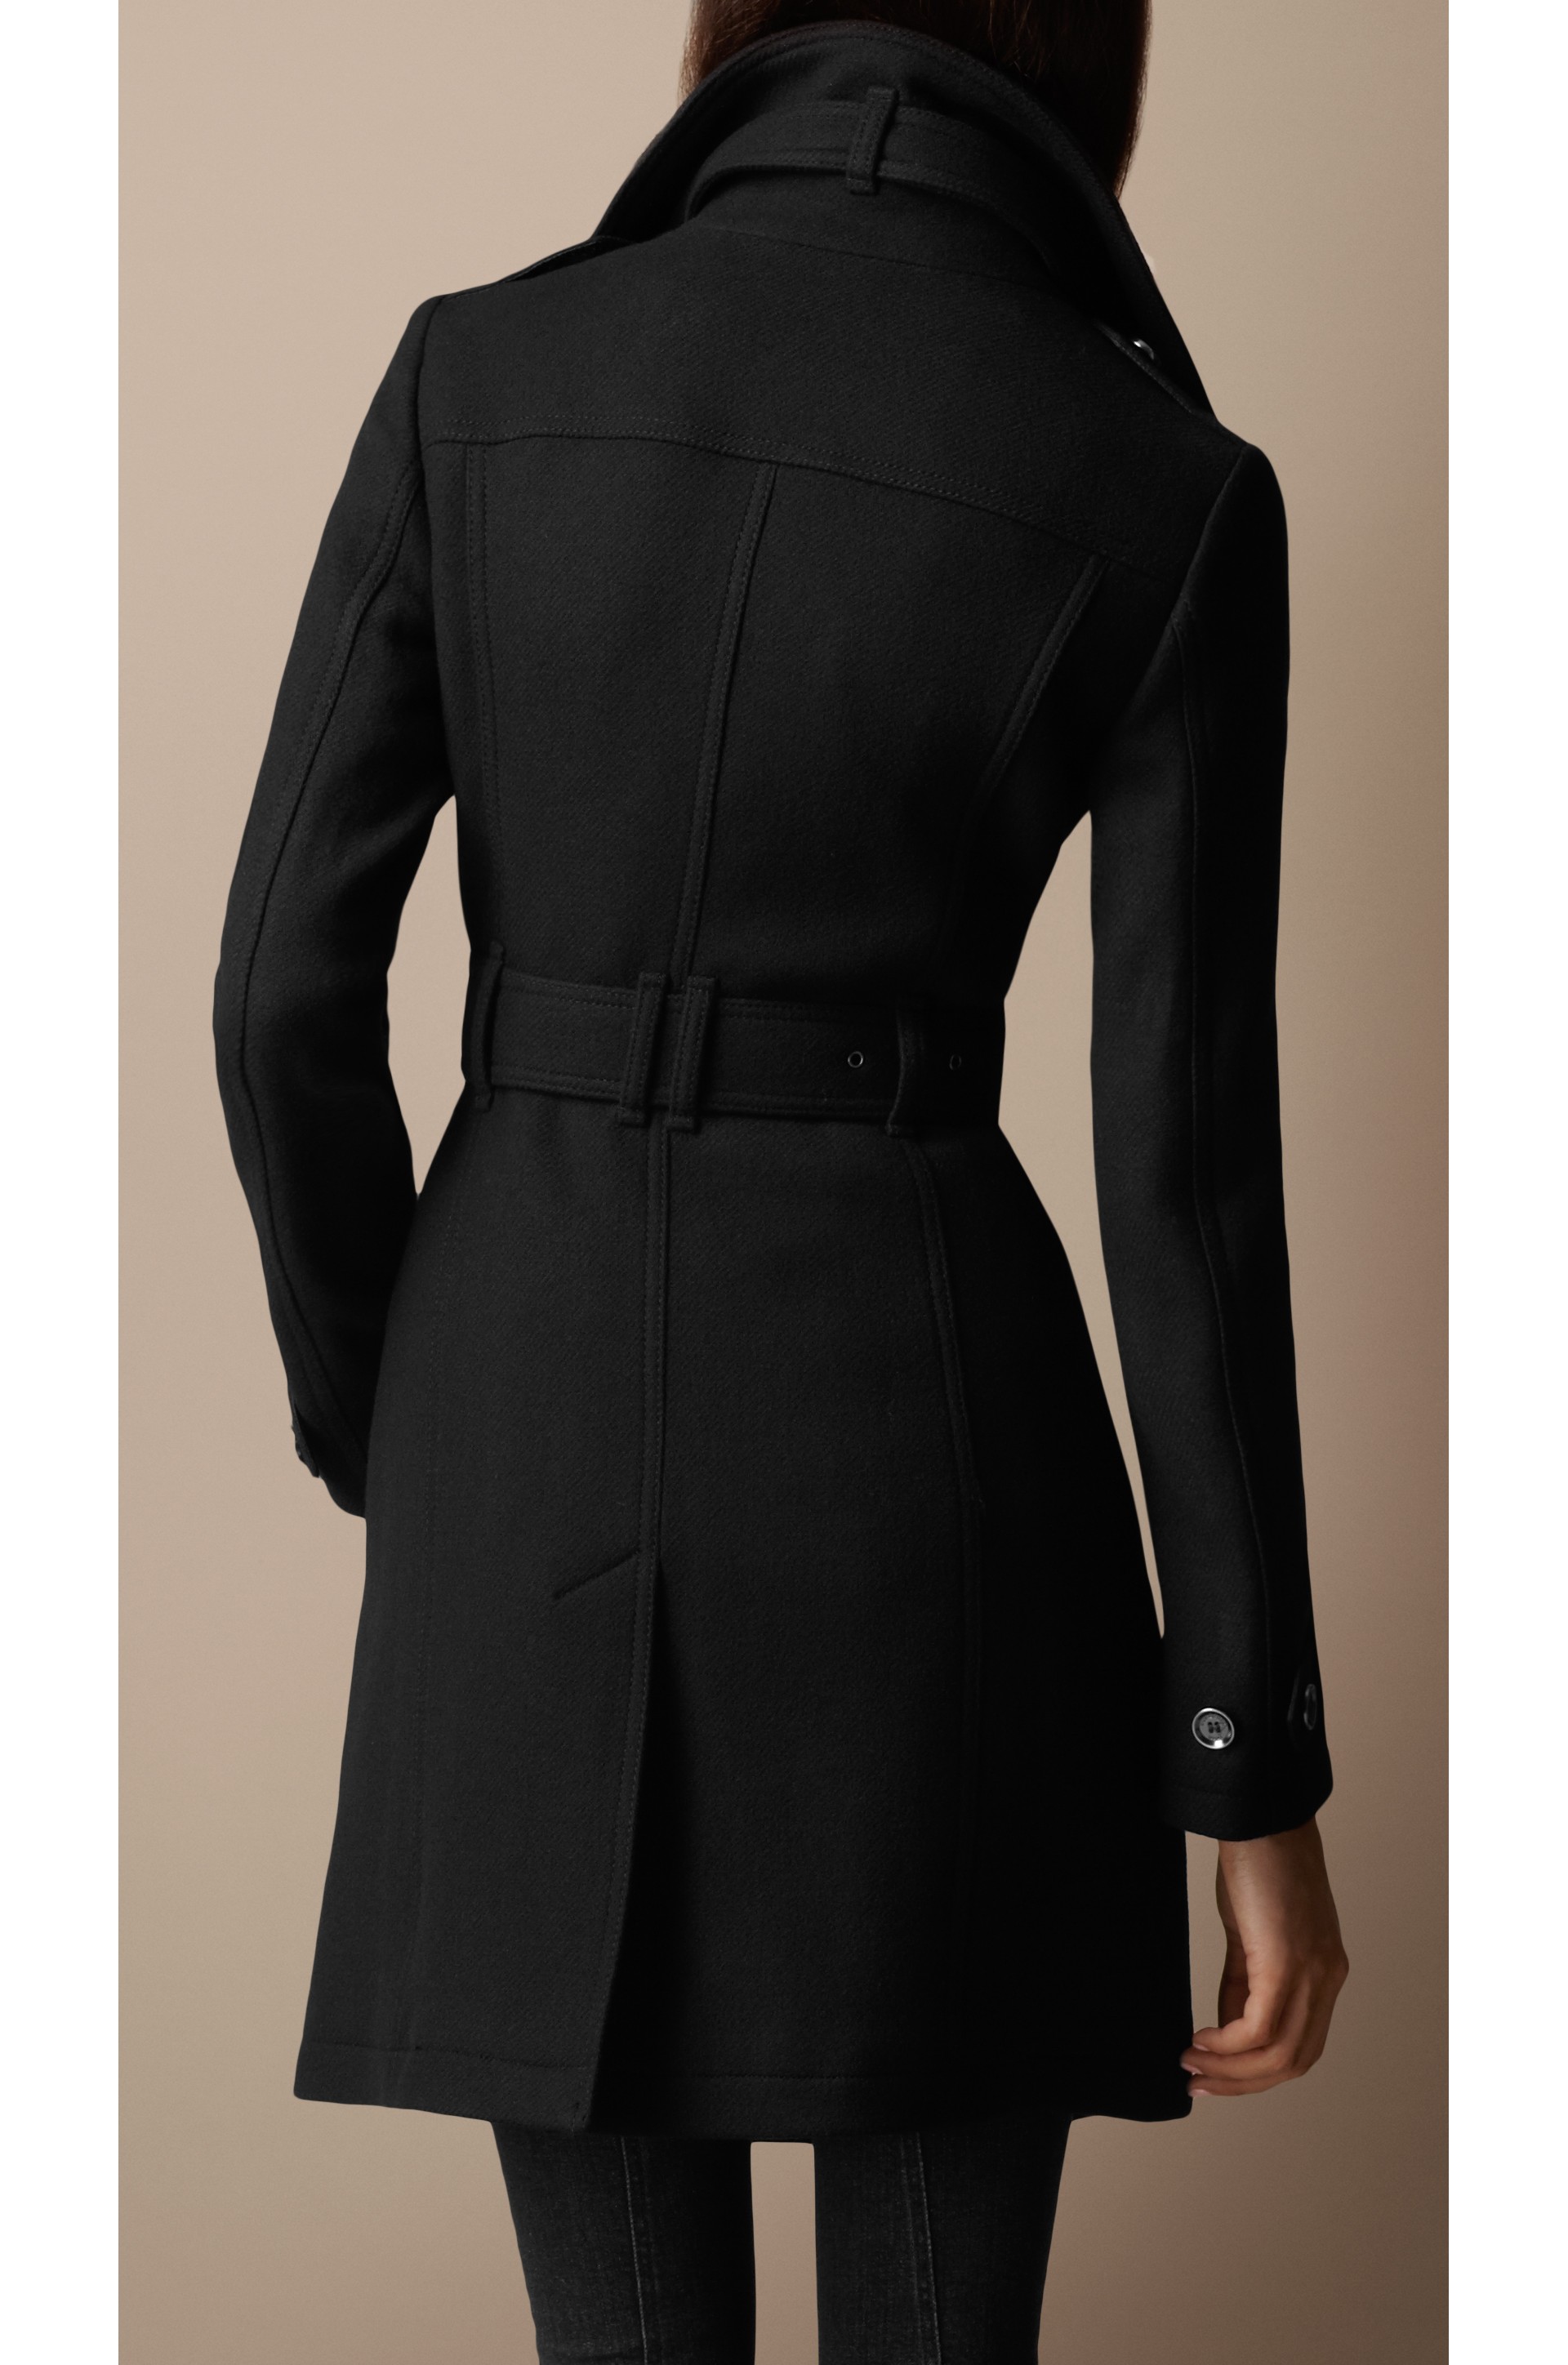 Funnel Neck Wool Twill Coat in Black - Women | Burberry United States